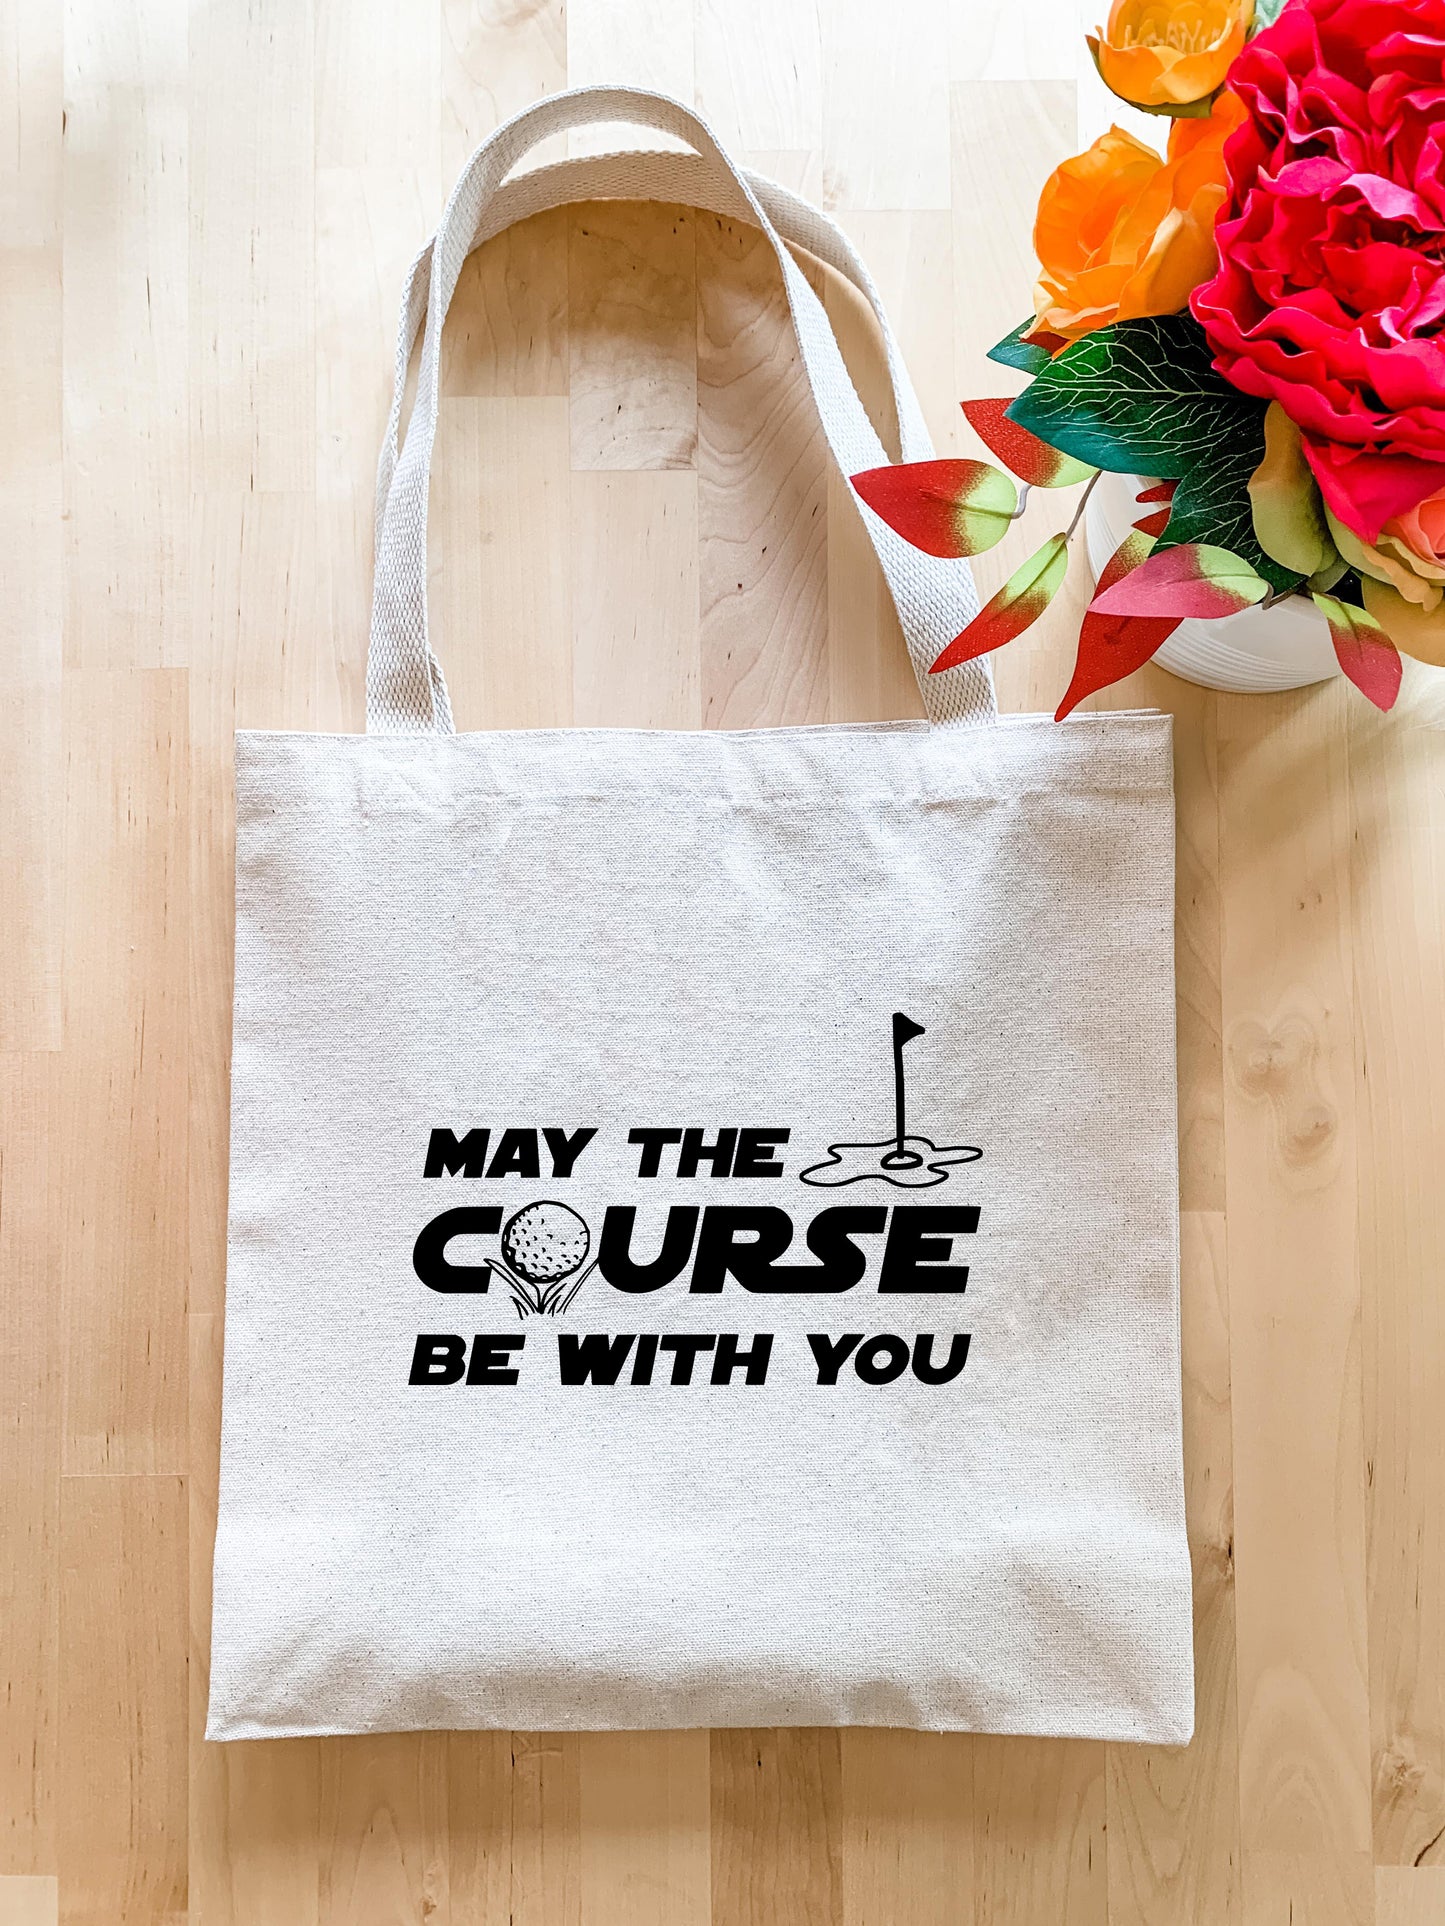 a tote bag sitting on a wooden floor next to a vase of flowers